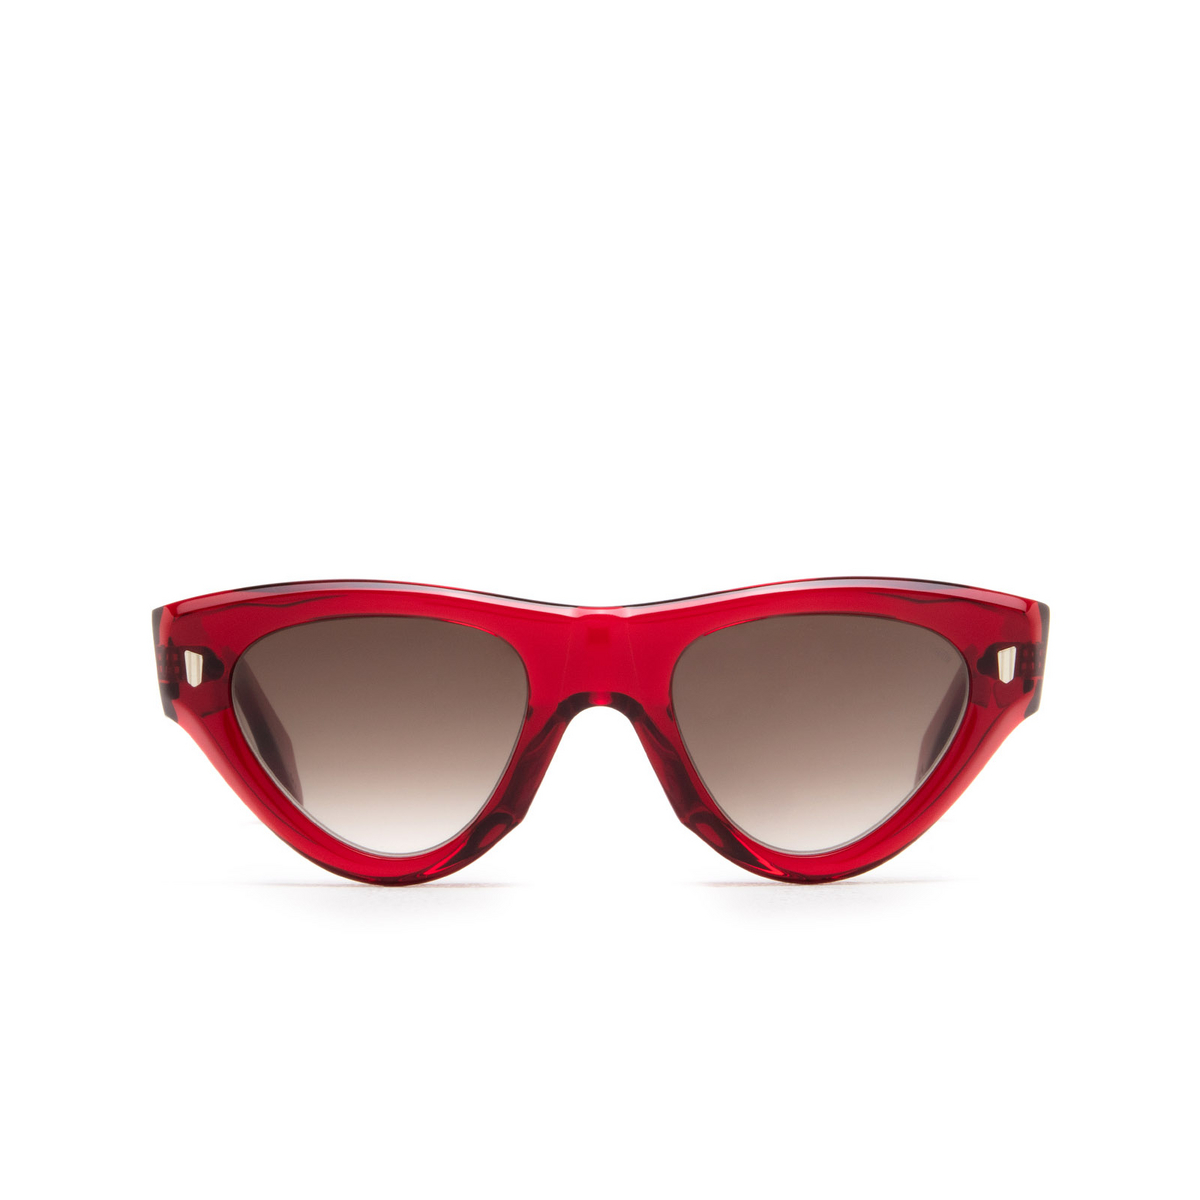 Cutler and Gross 9926 Sunglasses 04 Crystal Red - front view